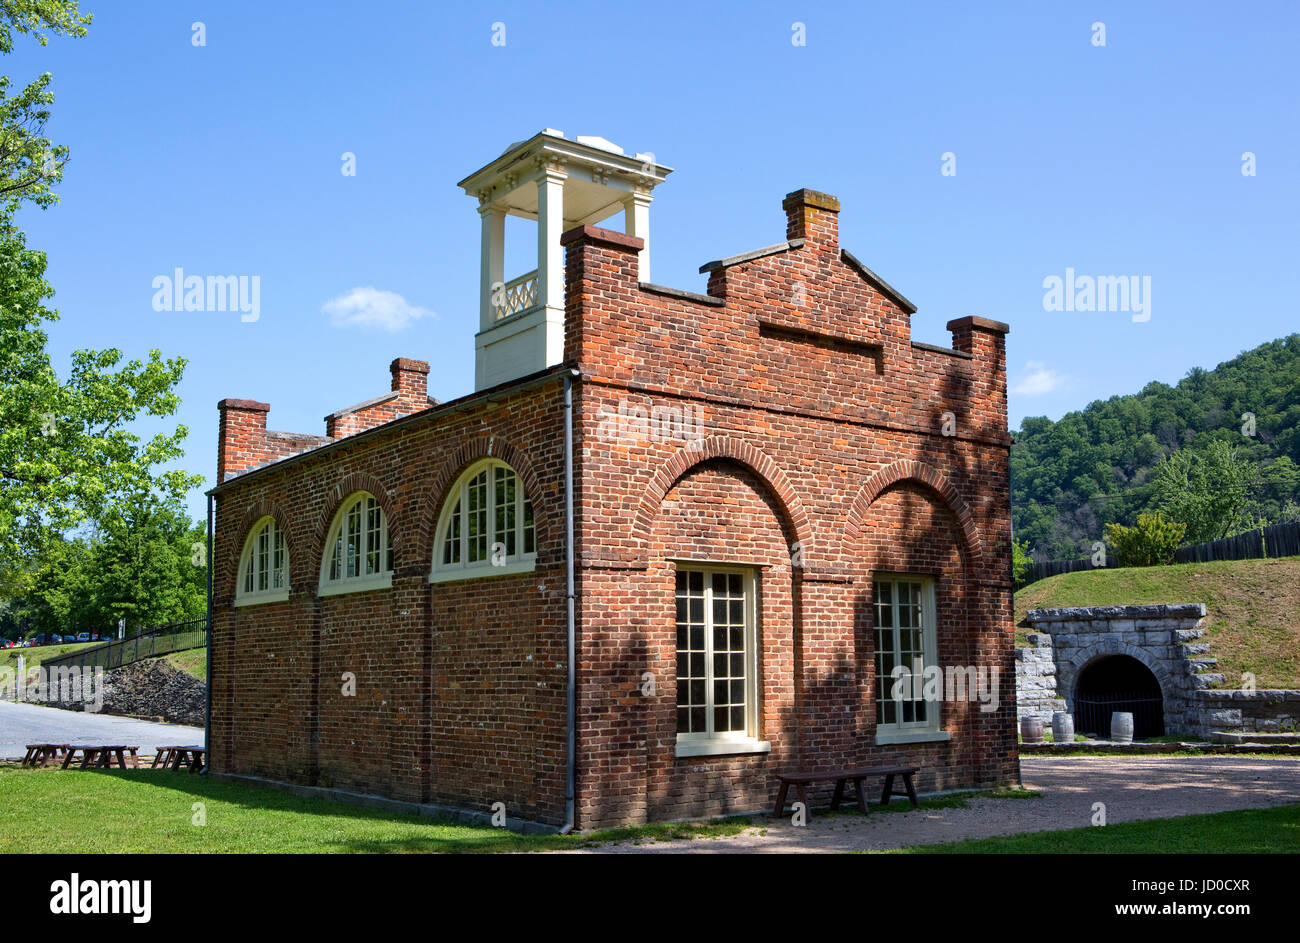 John Browns Fort located in Harpers Ferry National Historical Park, West Virginia, is a pre-Civil War era building owned and operated by the U.S. Nati Stock Photo